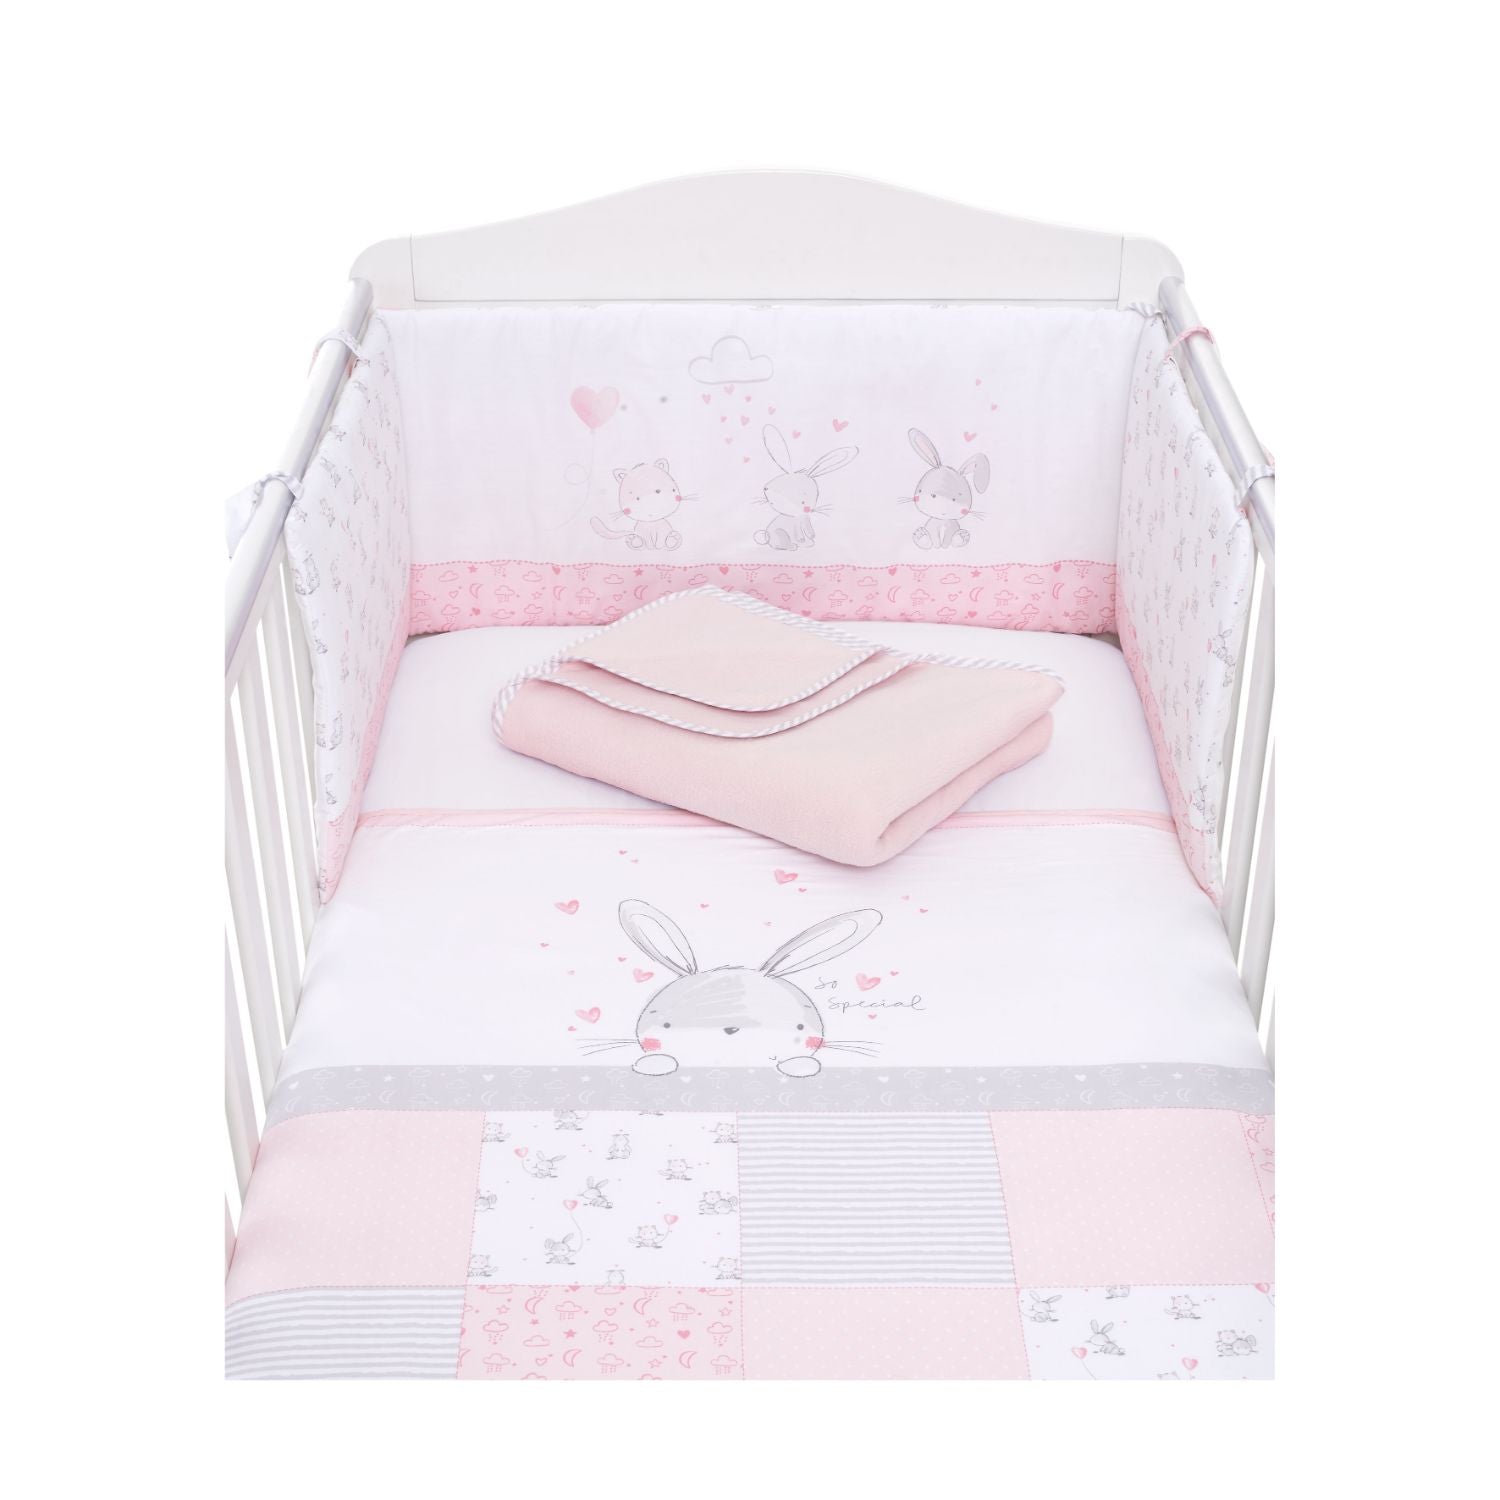 Motheracre My First Bed In Bag - Pink Bunny